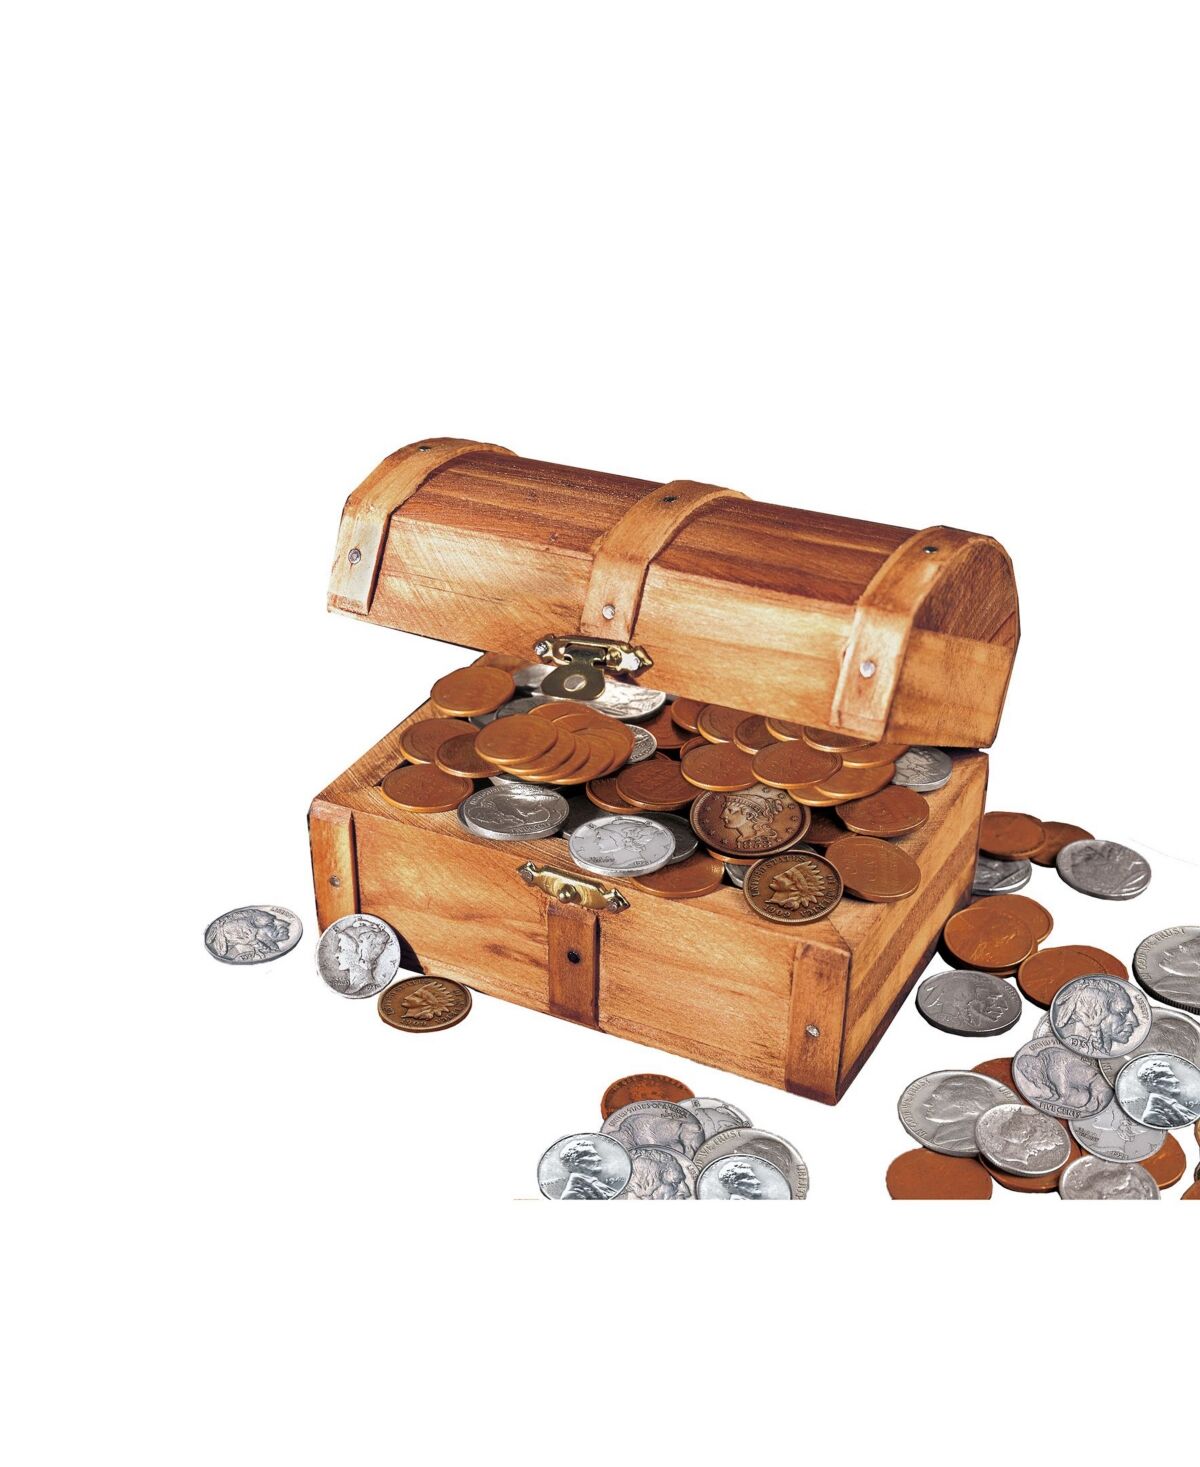 American Coin Treasures Historic Wooden Treasure Chest with At Least 50 Old U.s. Mint Coins - Multi